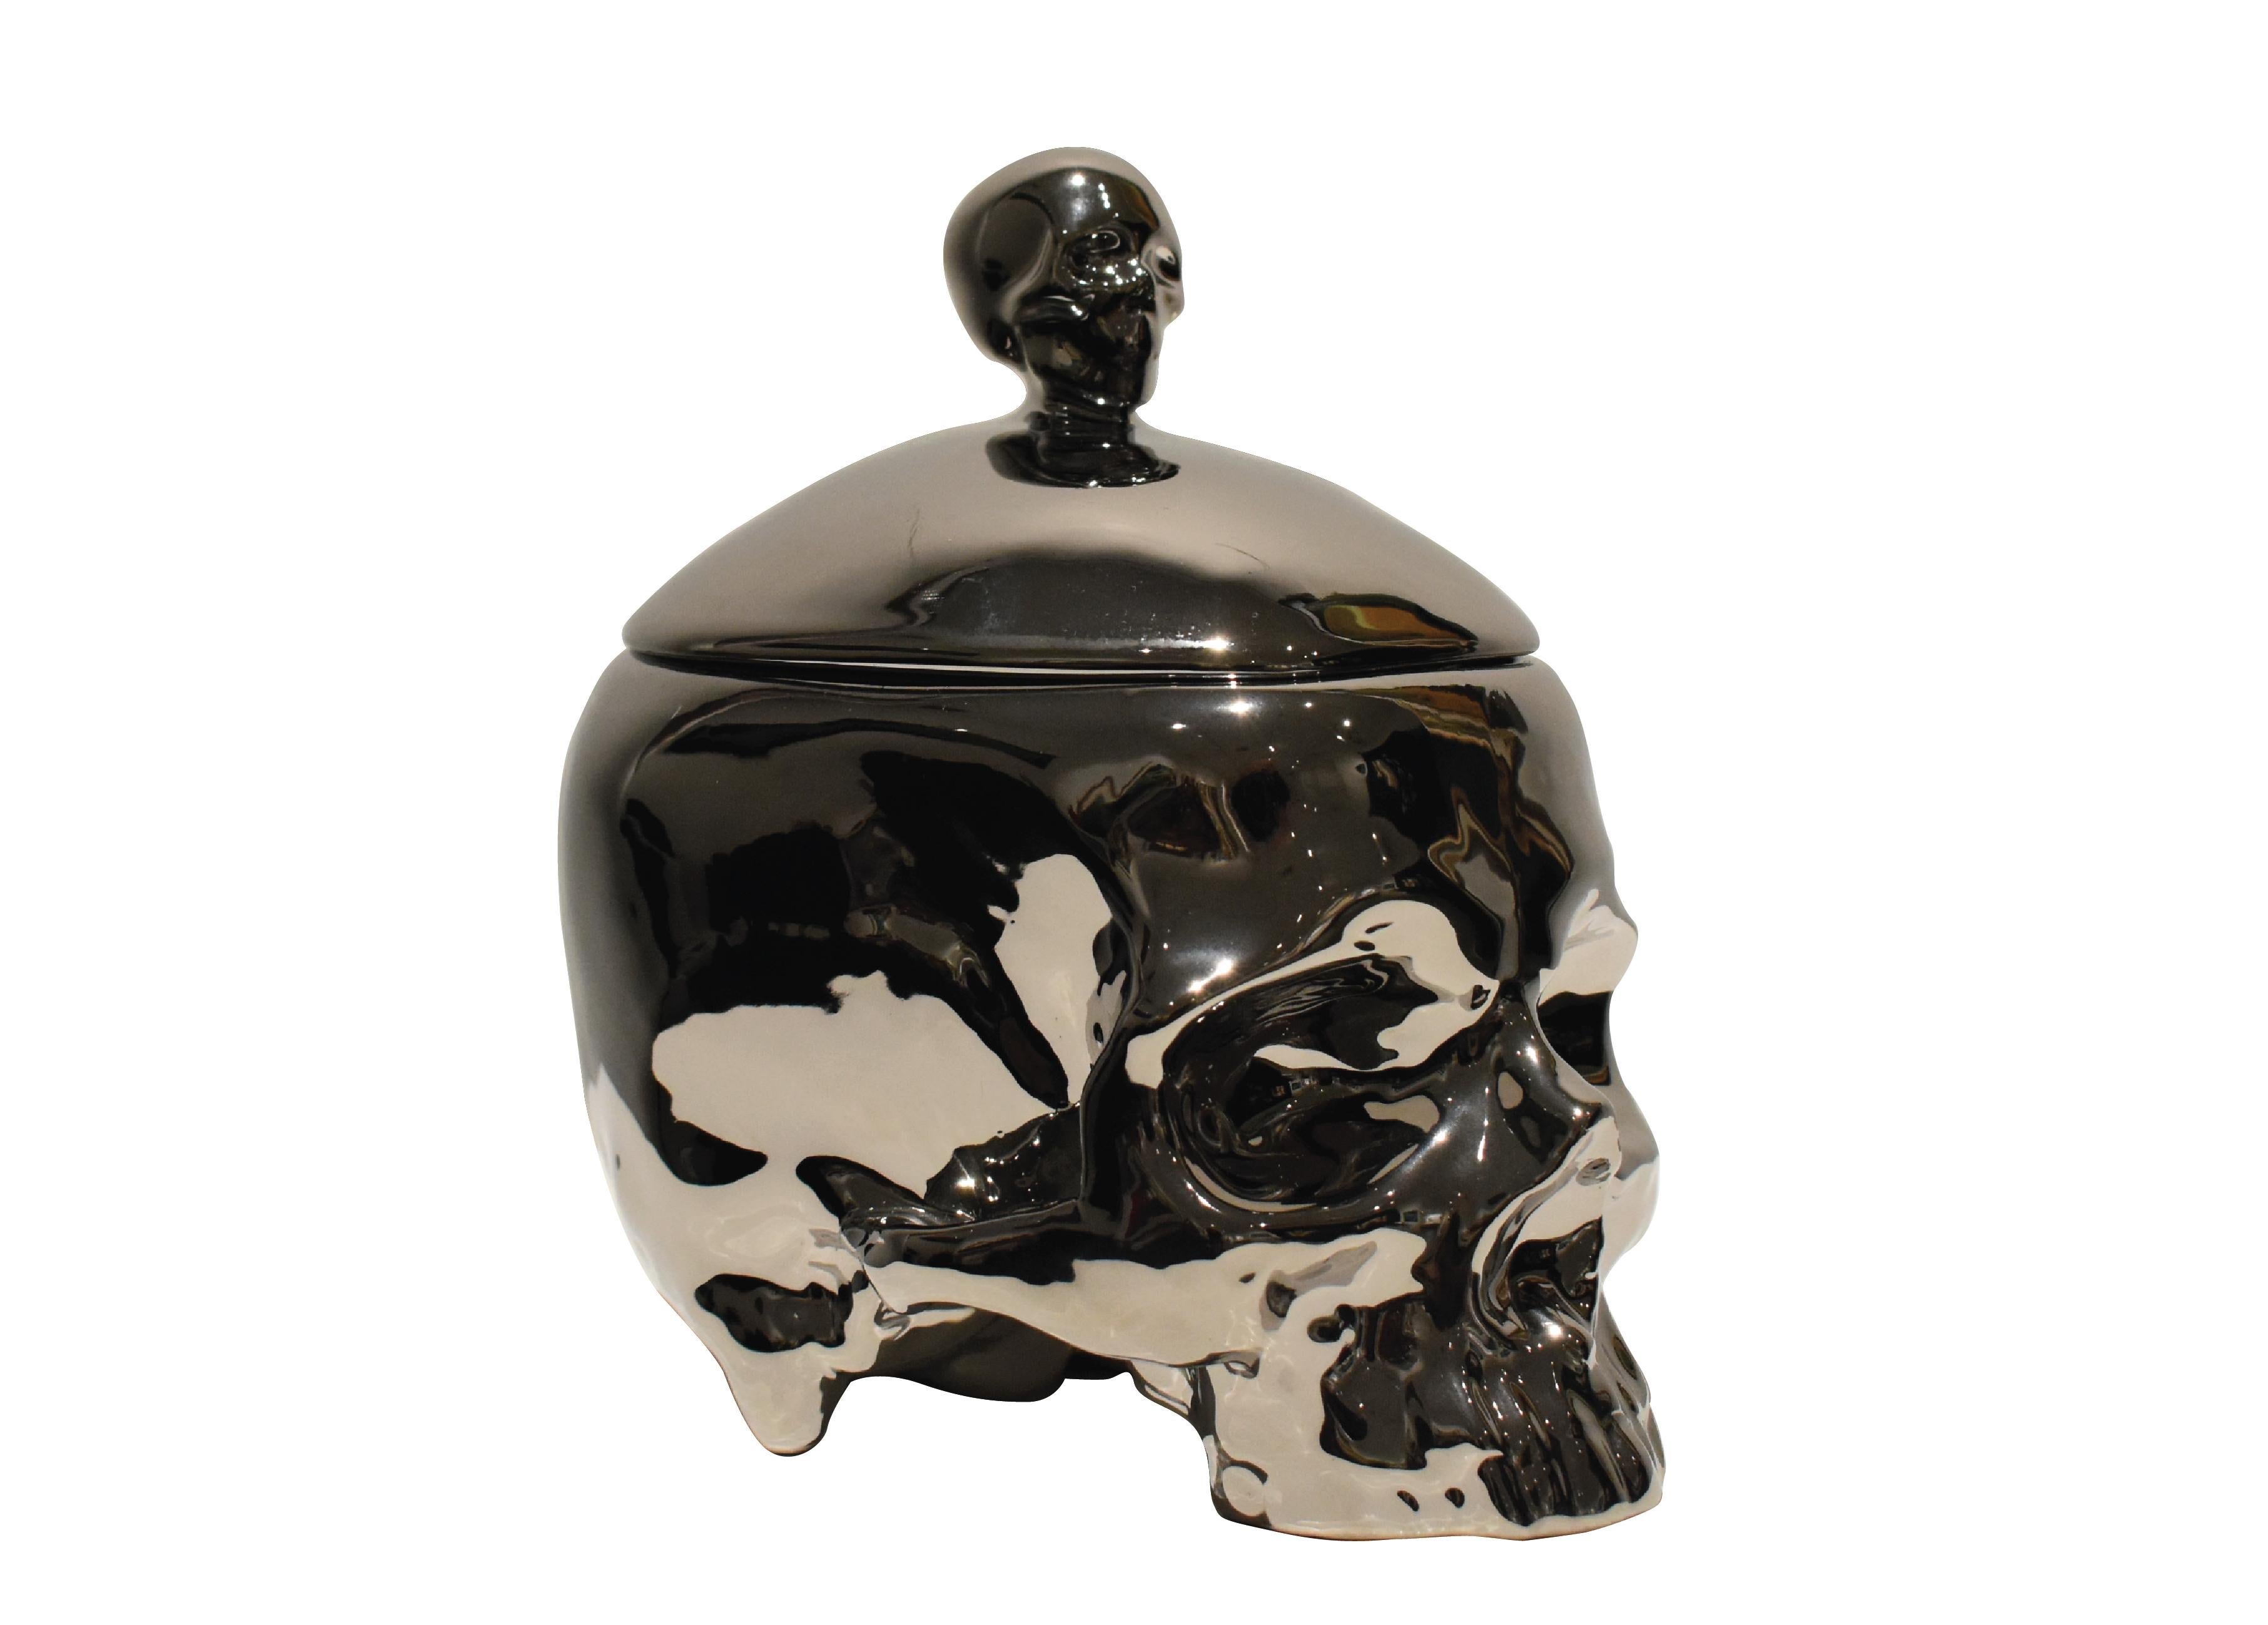 Huang Yulong Figurative Sculpture - Porcelain Sculpture With Skull Shape In Silver Color, Removable Cover